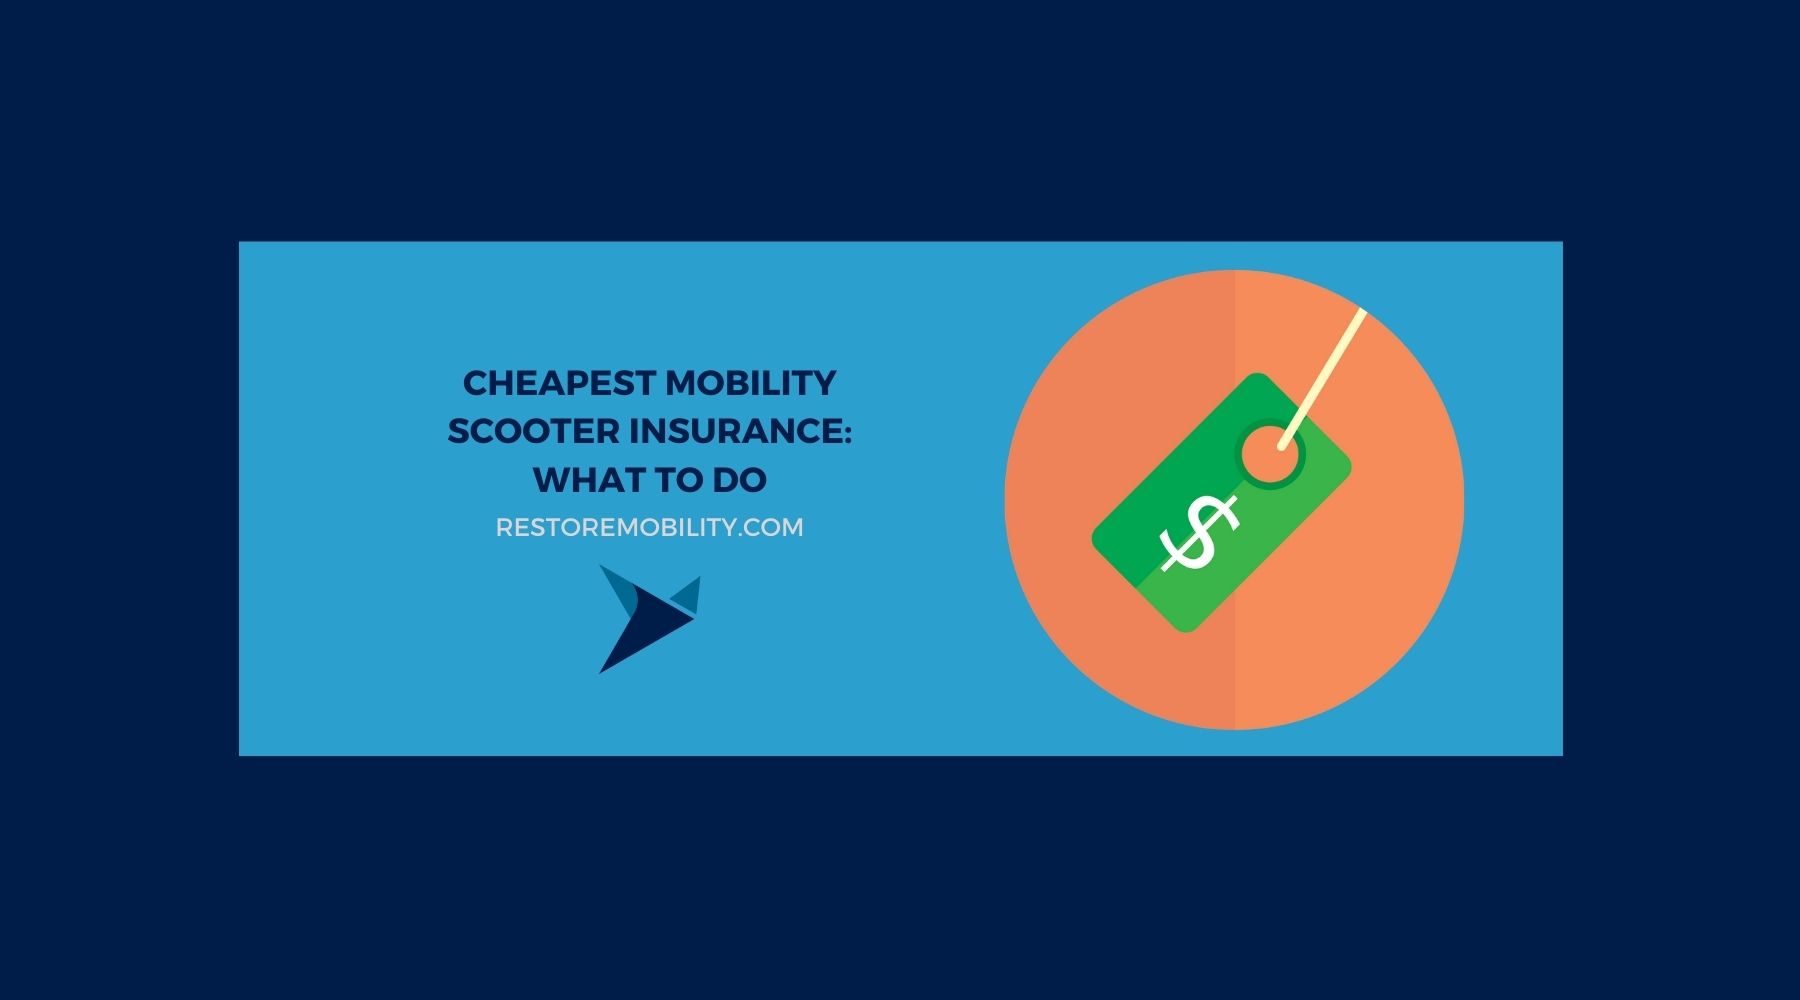 Cheapest Mobility Scooter Insurance: What To Do